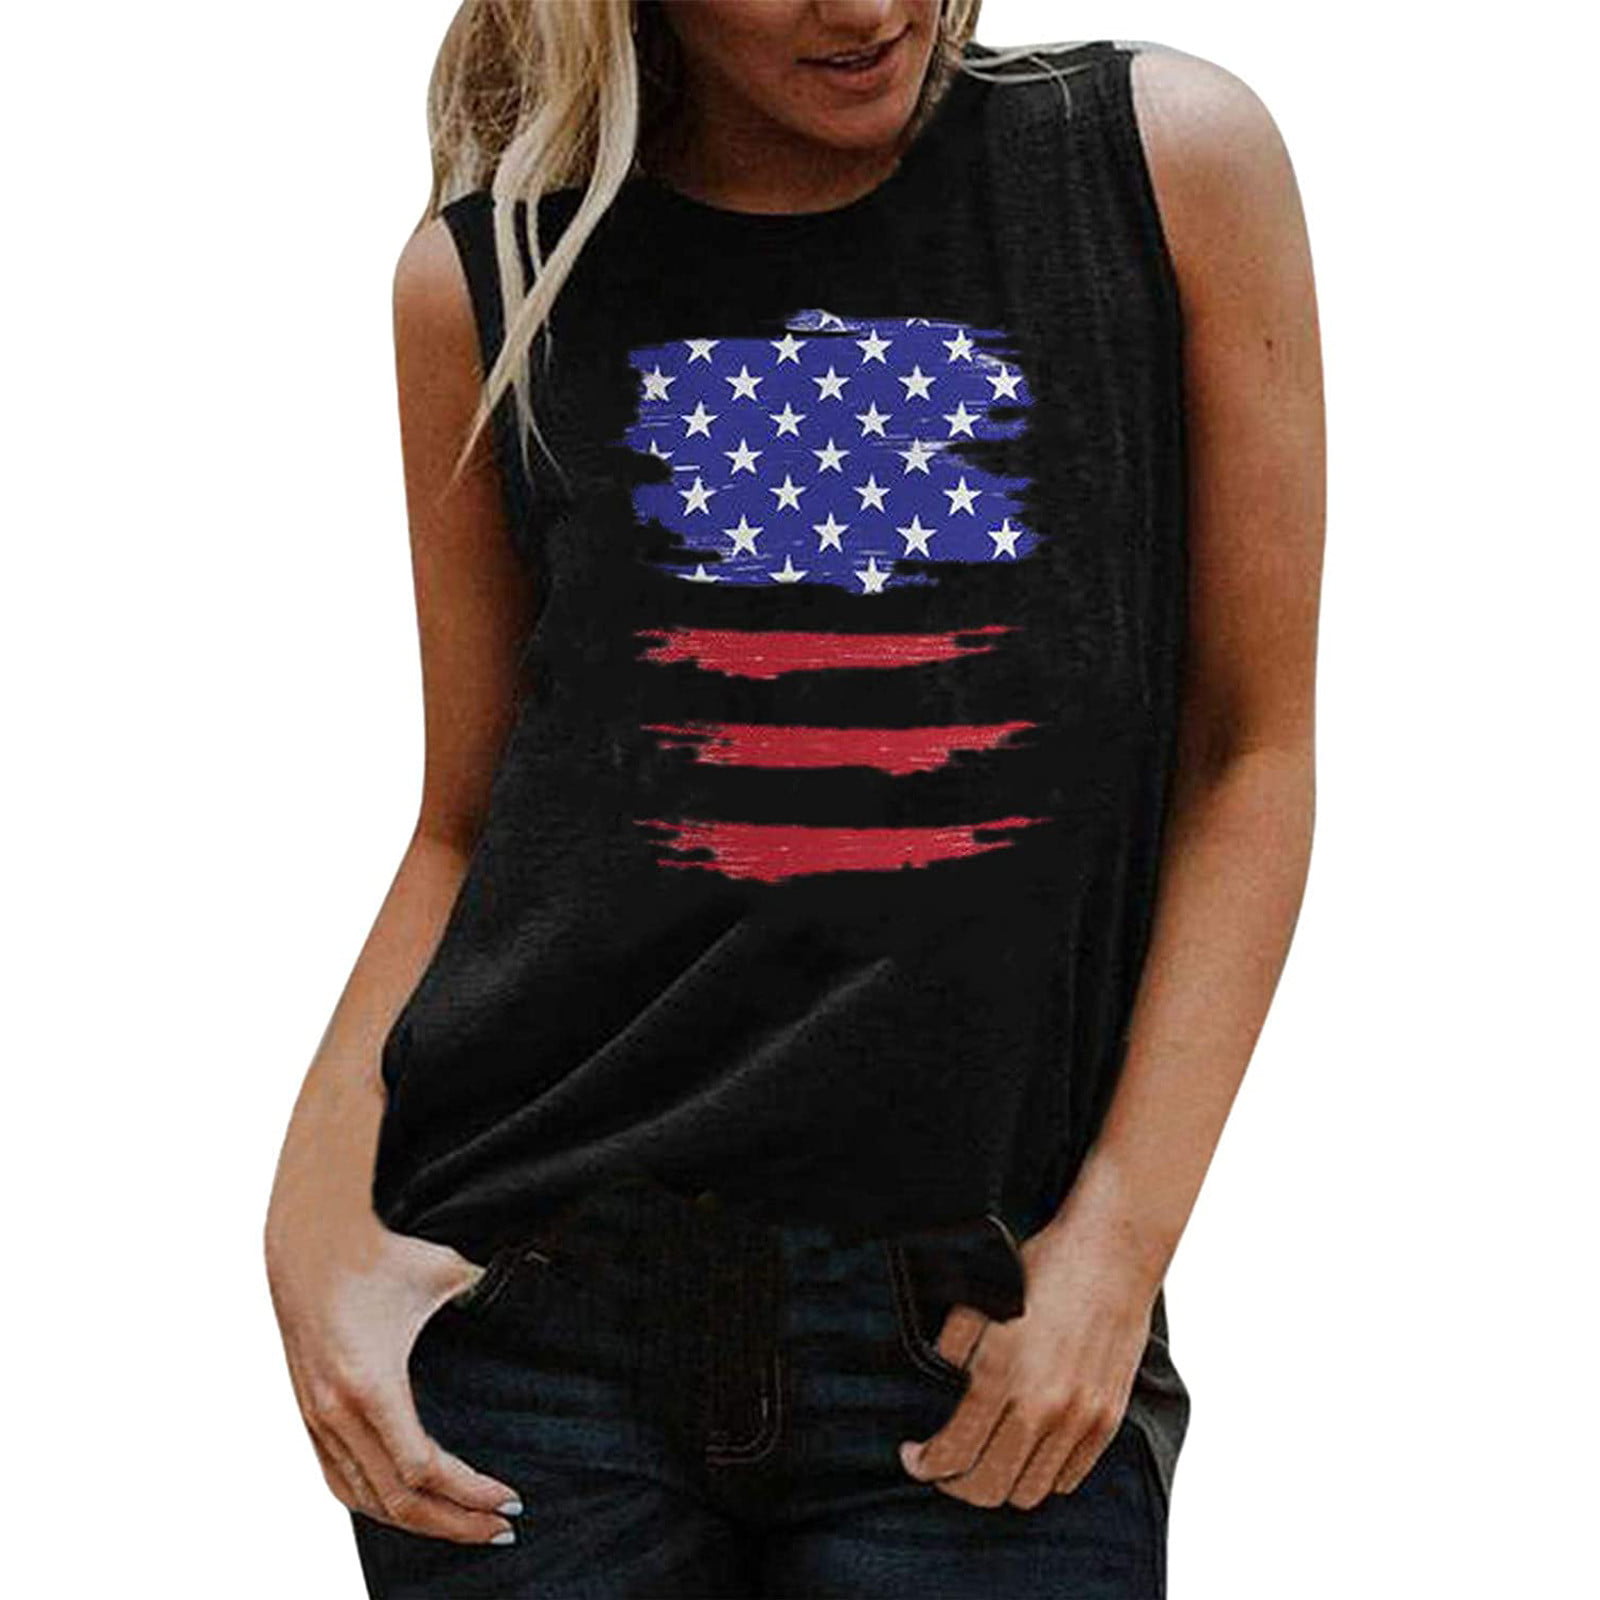 4th of July Shirts for Women Sleeveless O-Neck America Flag Print Two-Tone Stitching Top Tank T-Shirt Tops Blouse